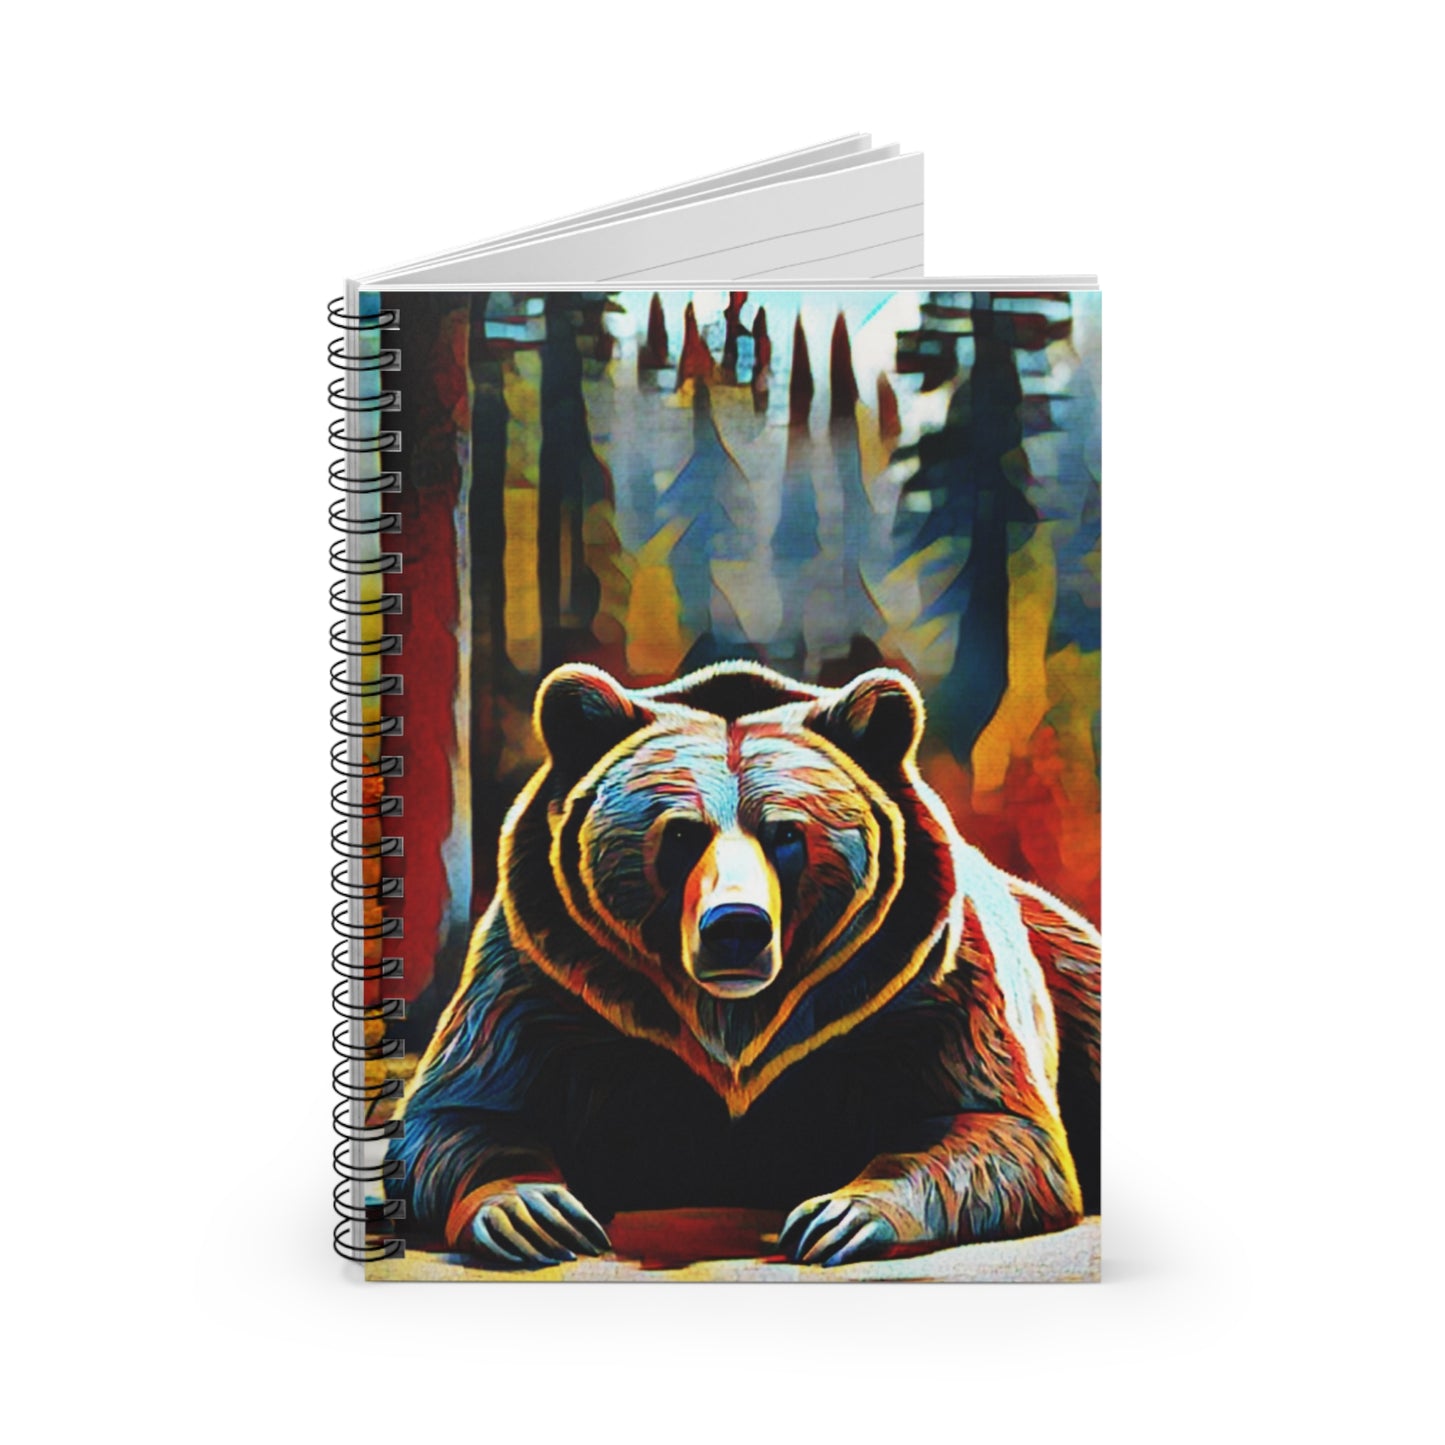 Grizzly Bear Artistic Spiral Notebook - Ruled Line